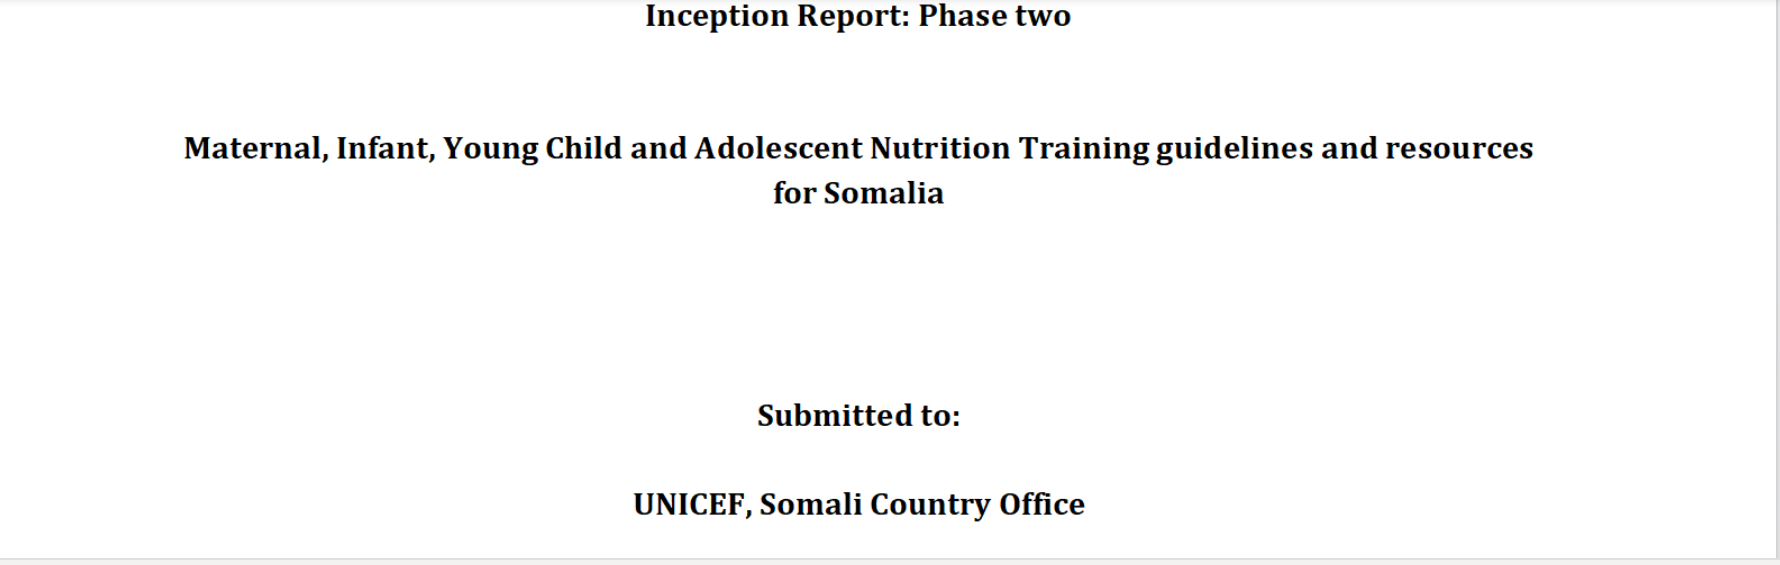 Maternal, Infant and Young Child and Adolescent Nutrition Operational and Programme guideline.